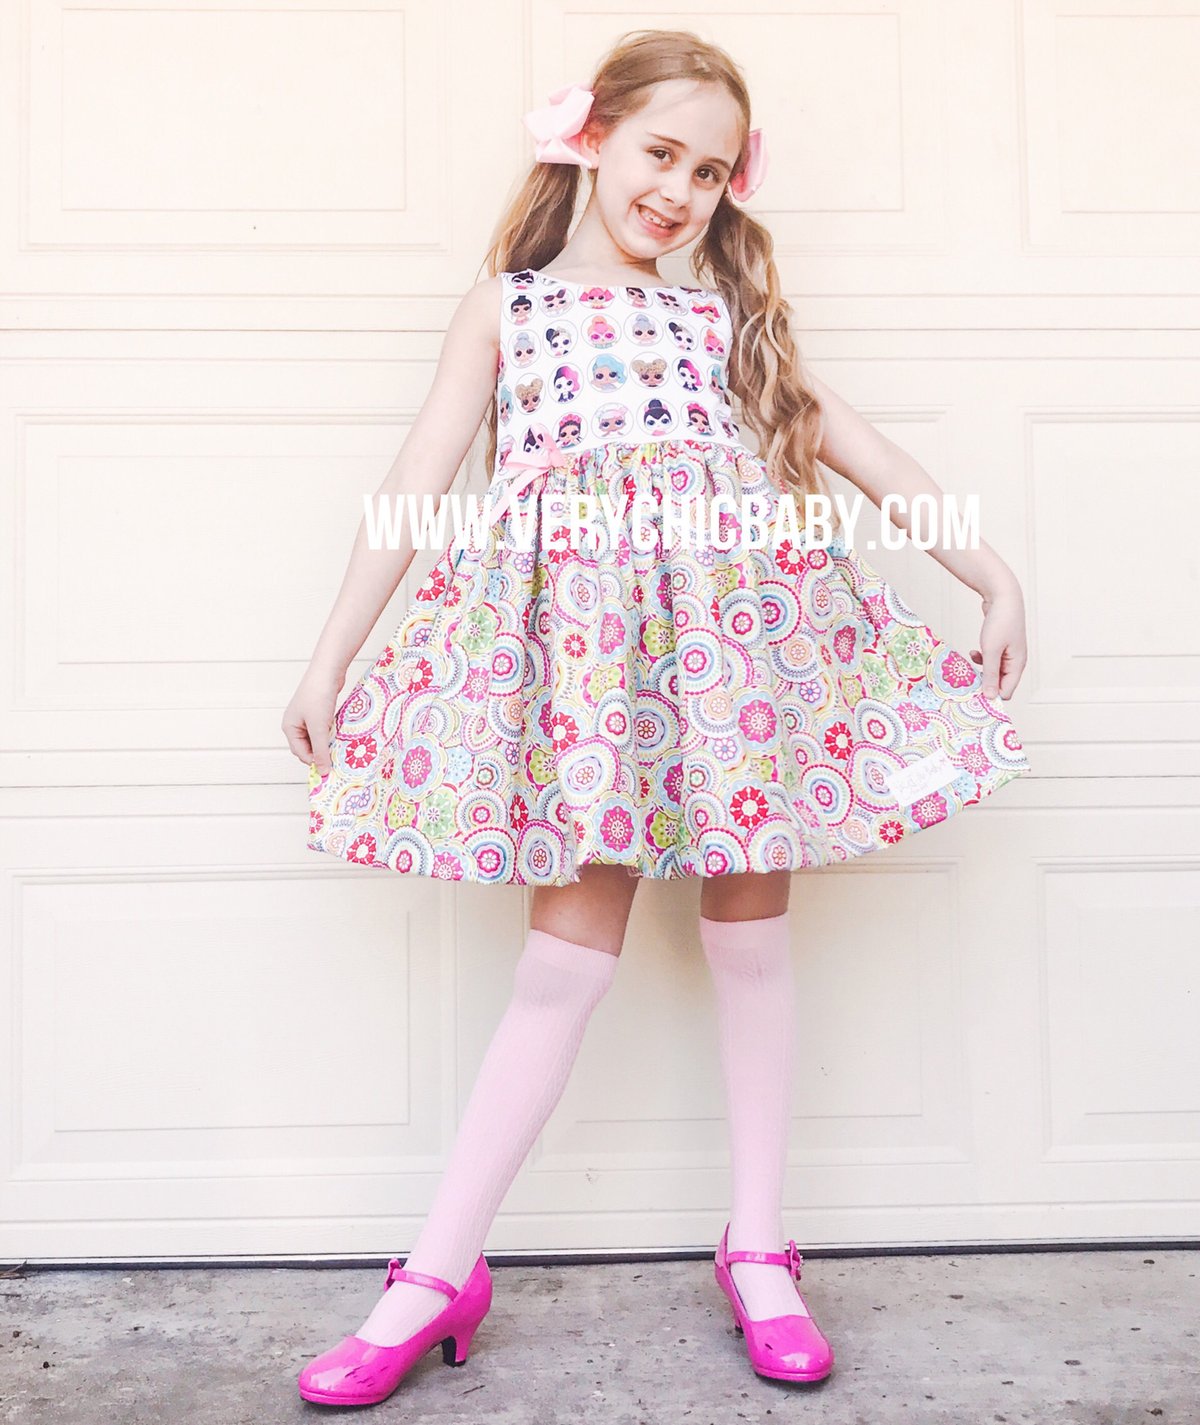 LOL Surprise Doll Dress or Tunic | VeryChicBaby